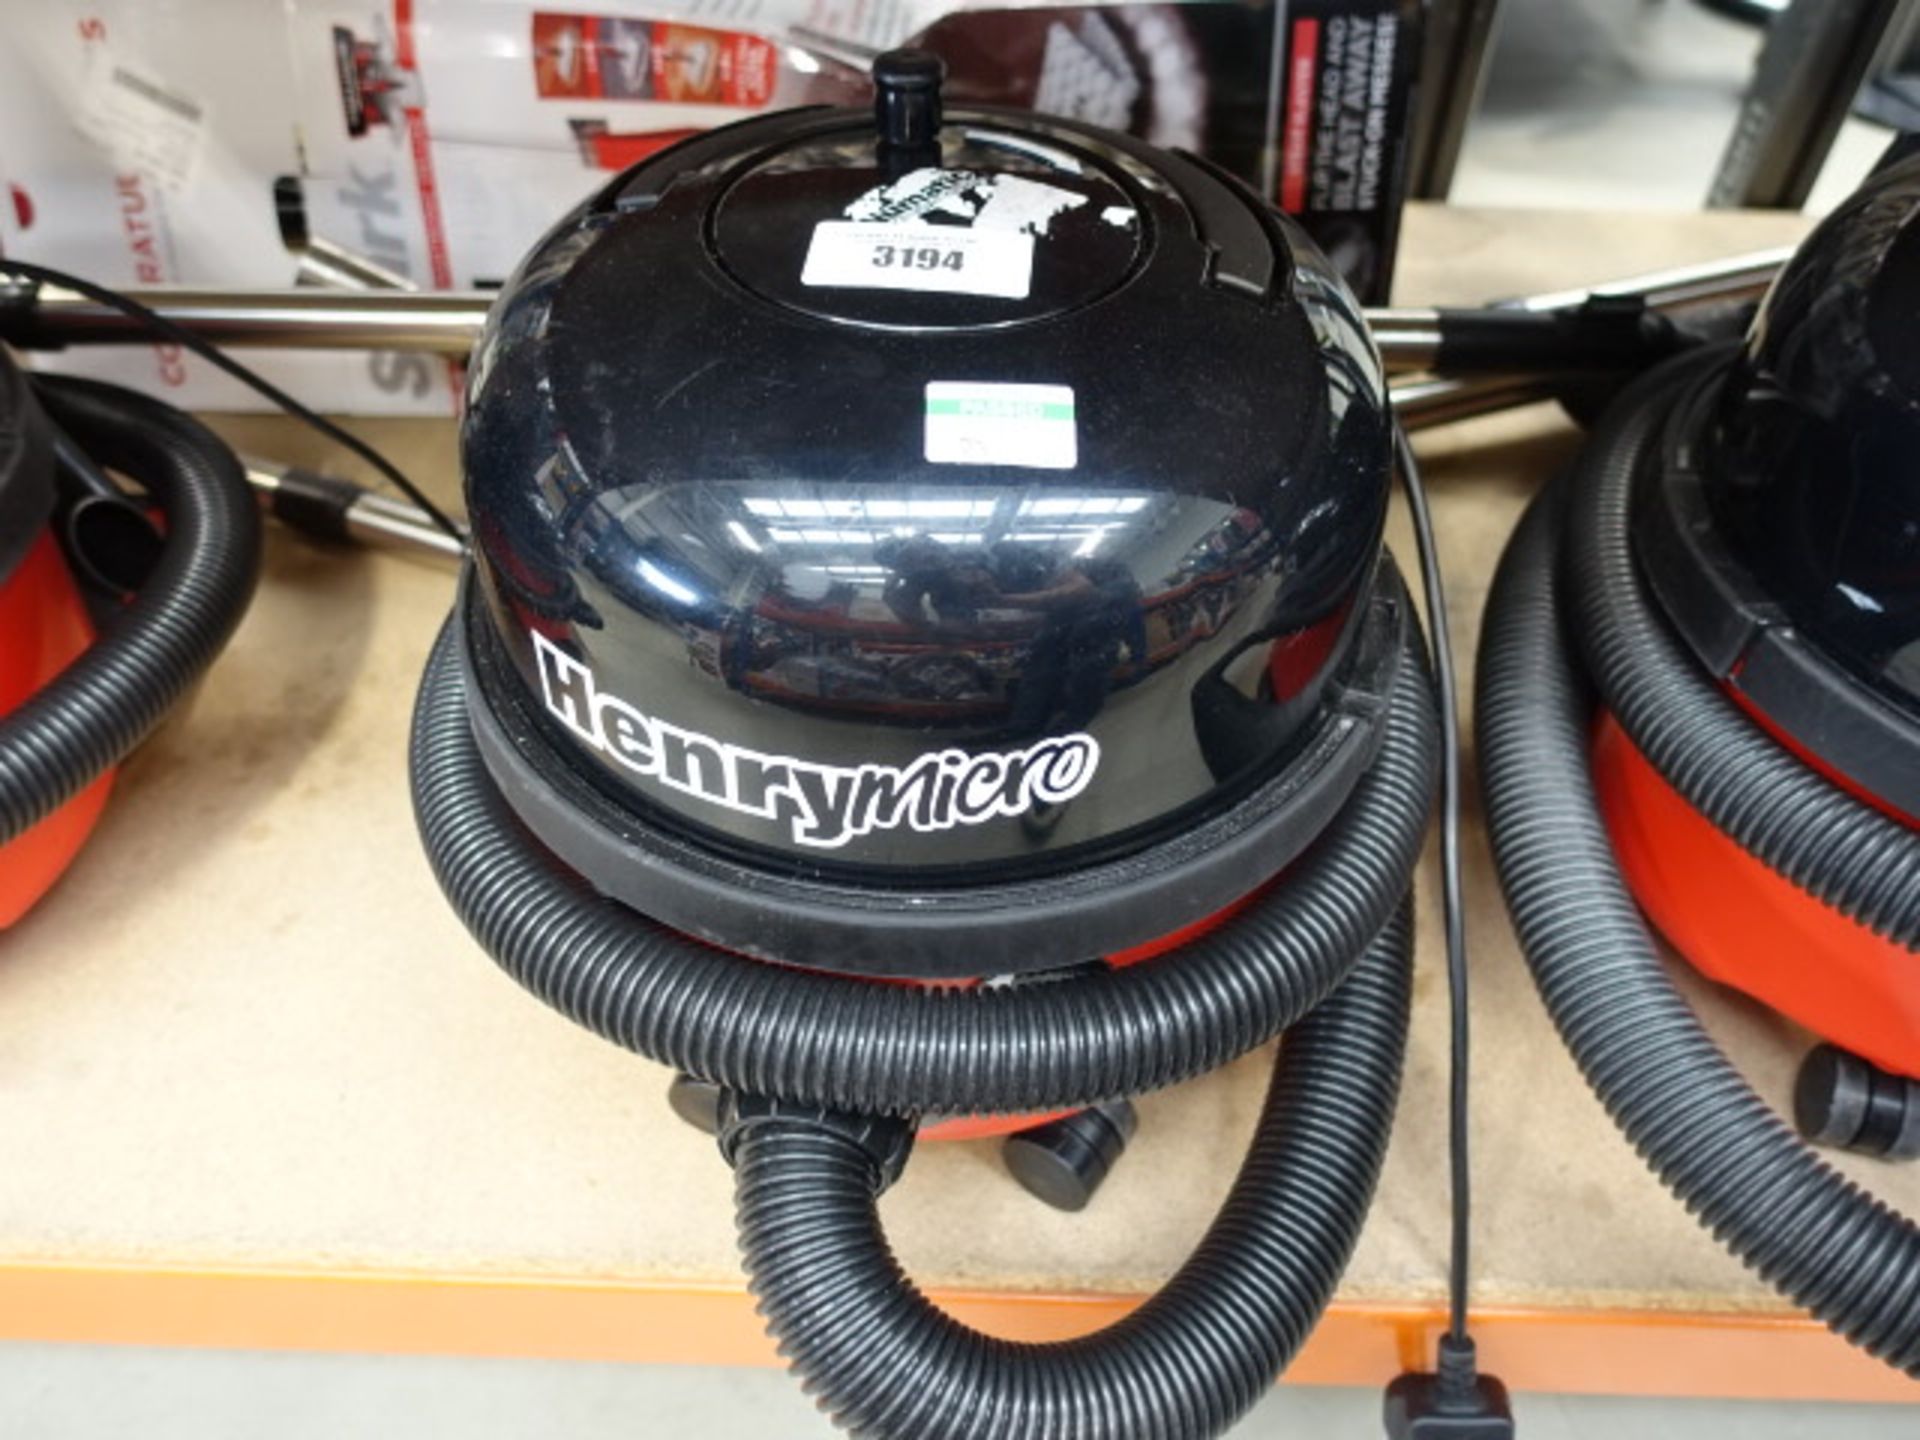 Henry Micro vacuum cleaner with pole